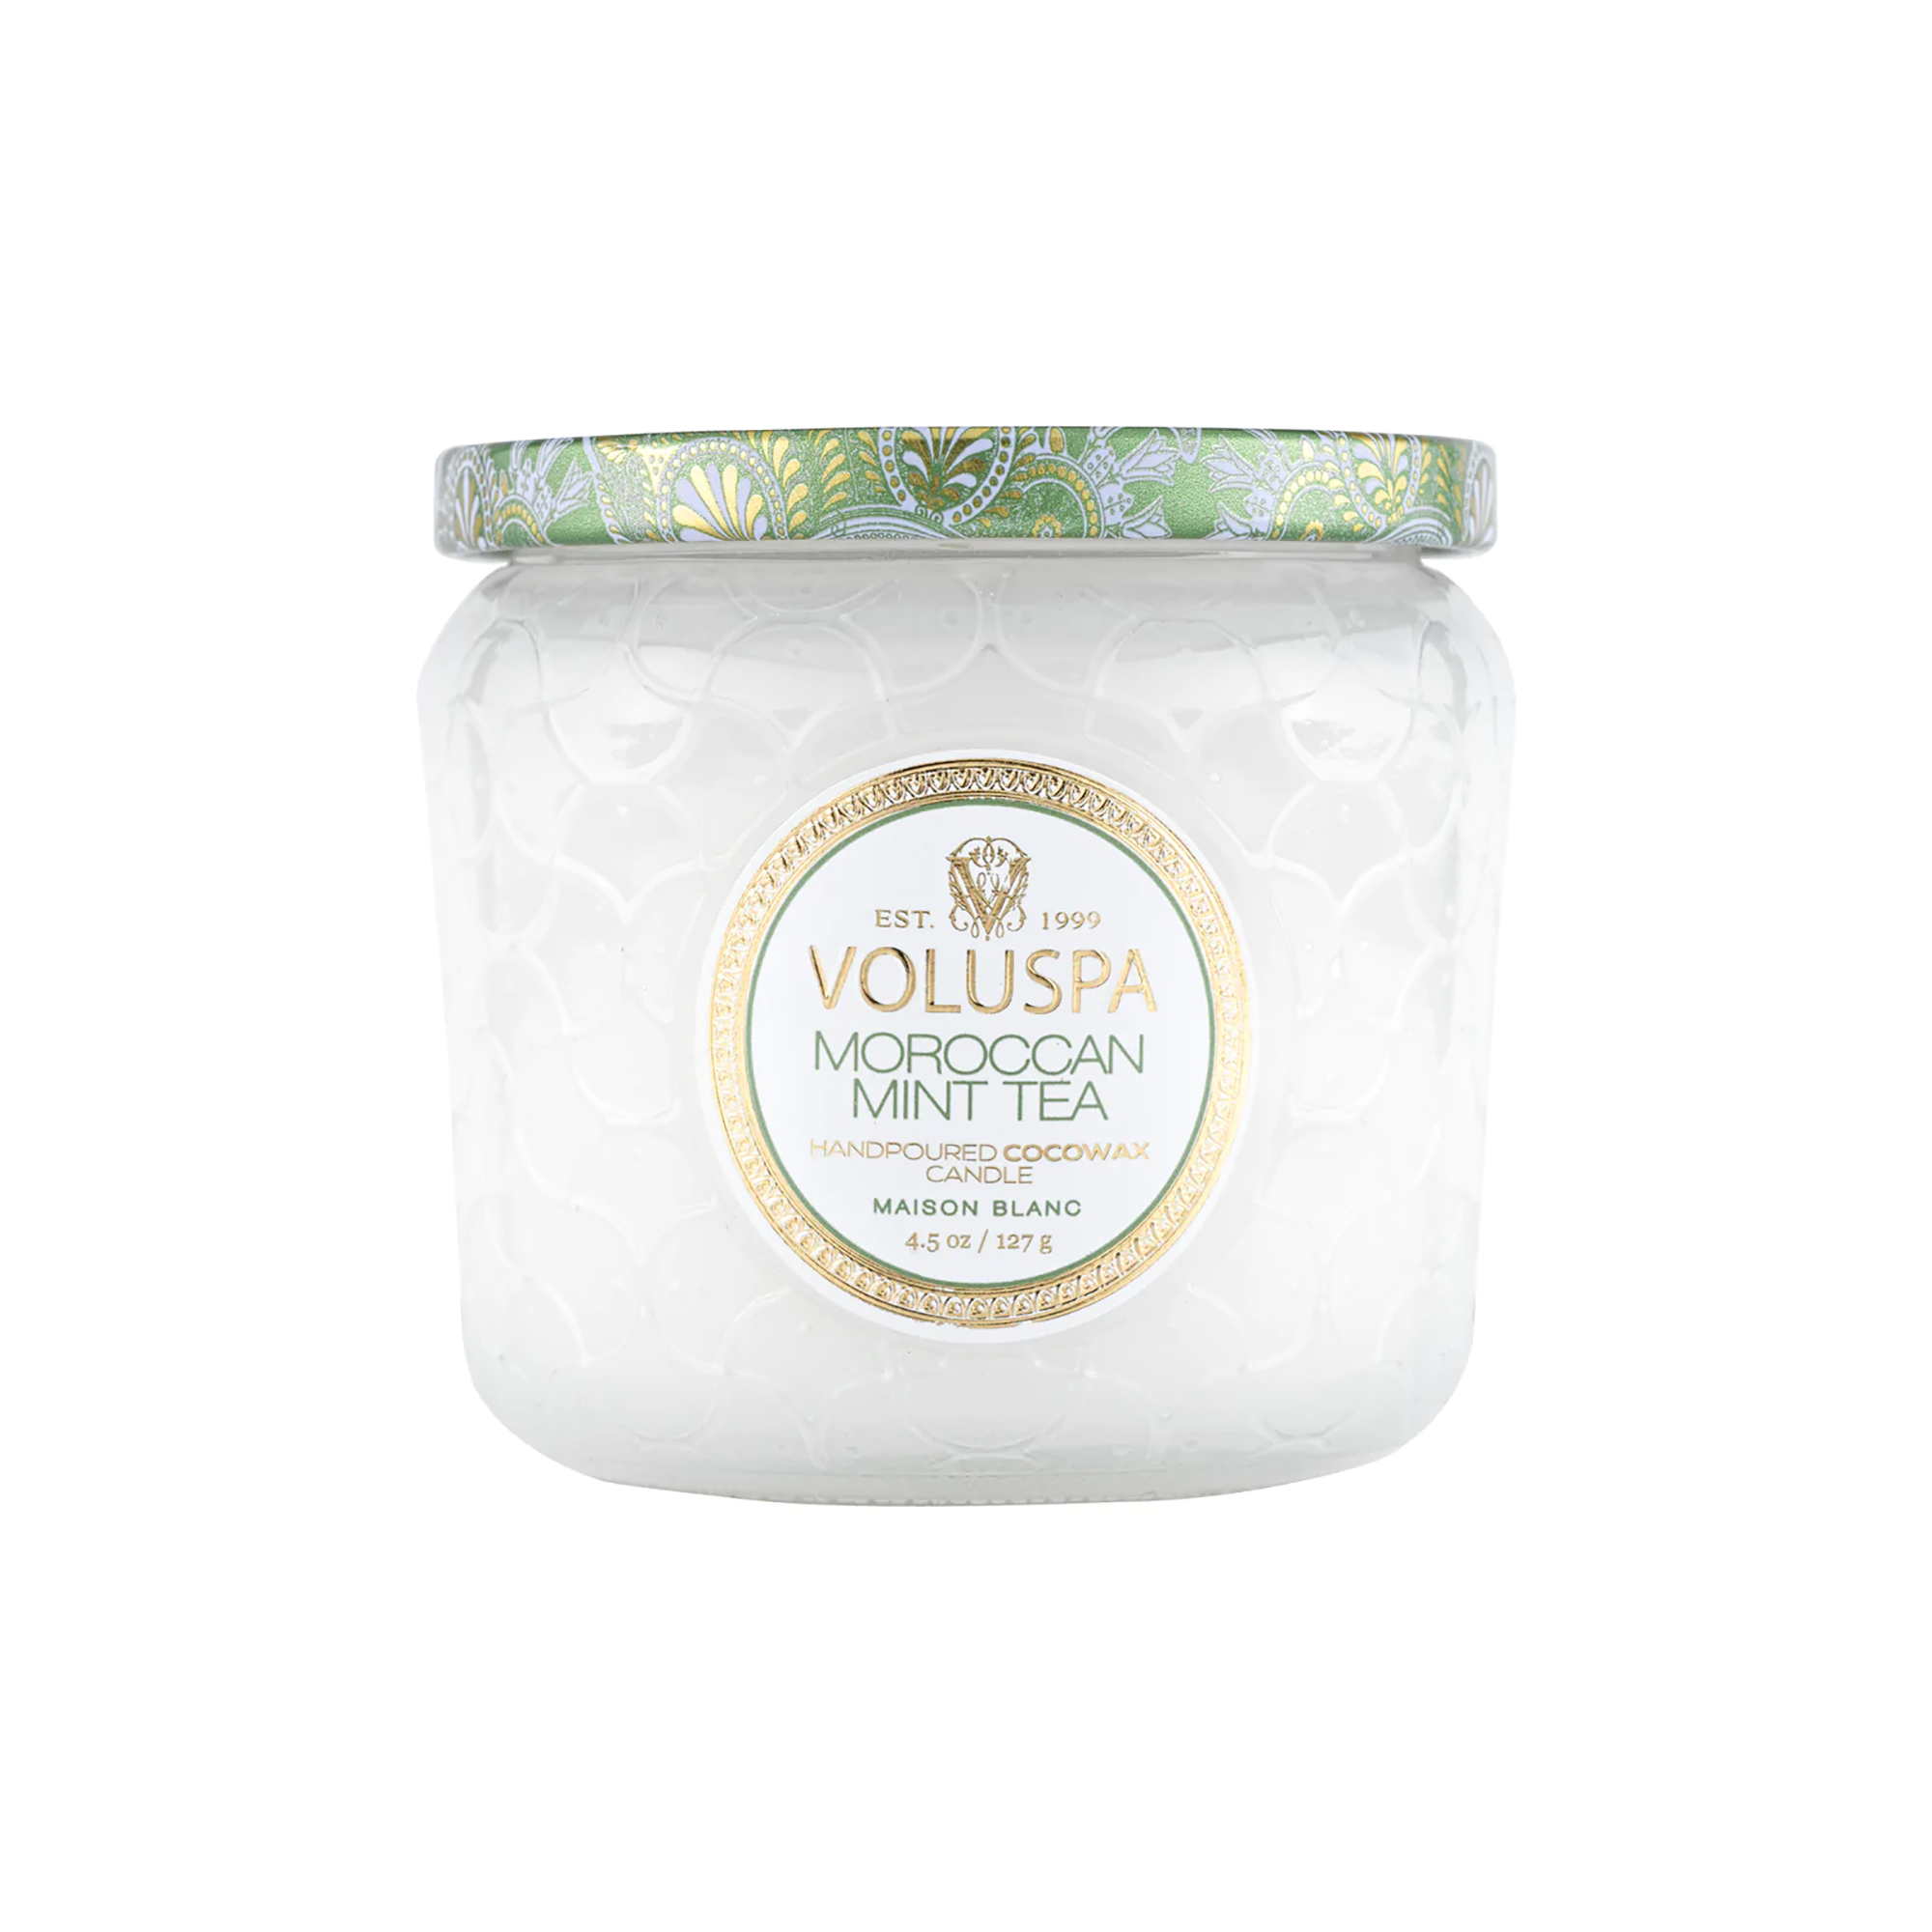 Voluspa Maison Blanc Petite Glass Jar Candle with Lid / MOROCCAN MINT